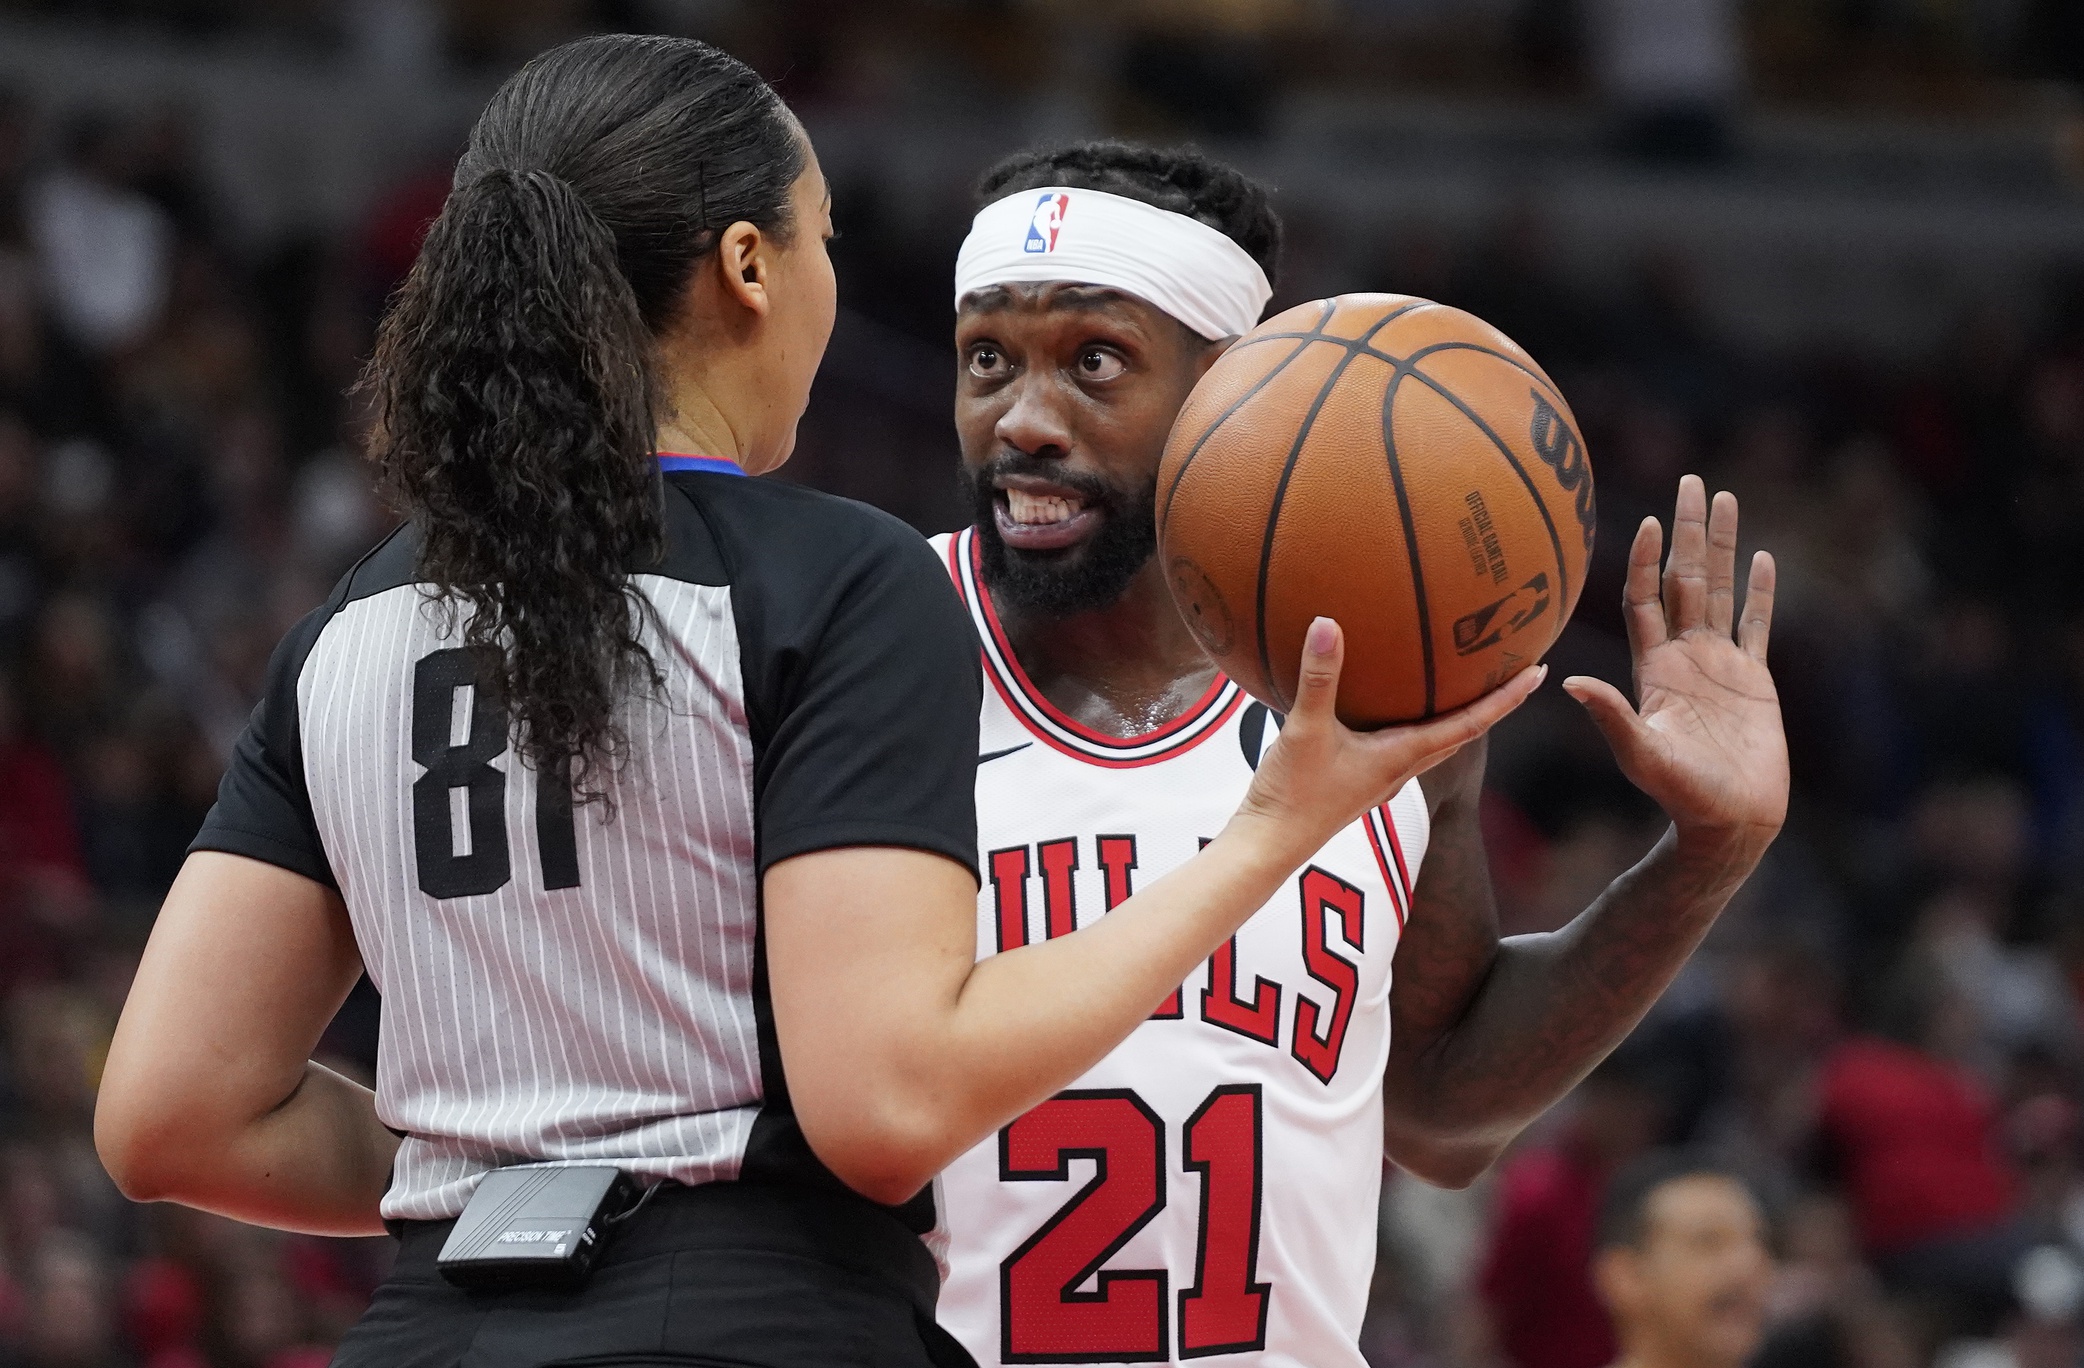 Feb 26, 2023; Chicago, Illinois, USA; Chicago Bulls guard Patrick Beverly (21) talks with the referee during the second half against the Washington Wizards at United Center. Mandatory Credit: David Banks-USA TODAY Sports